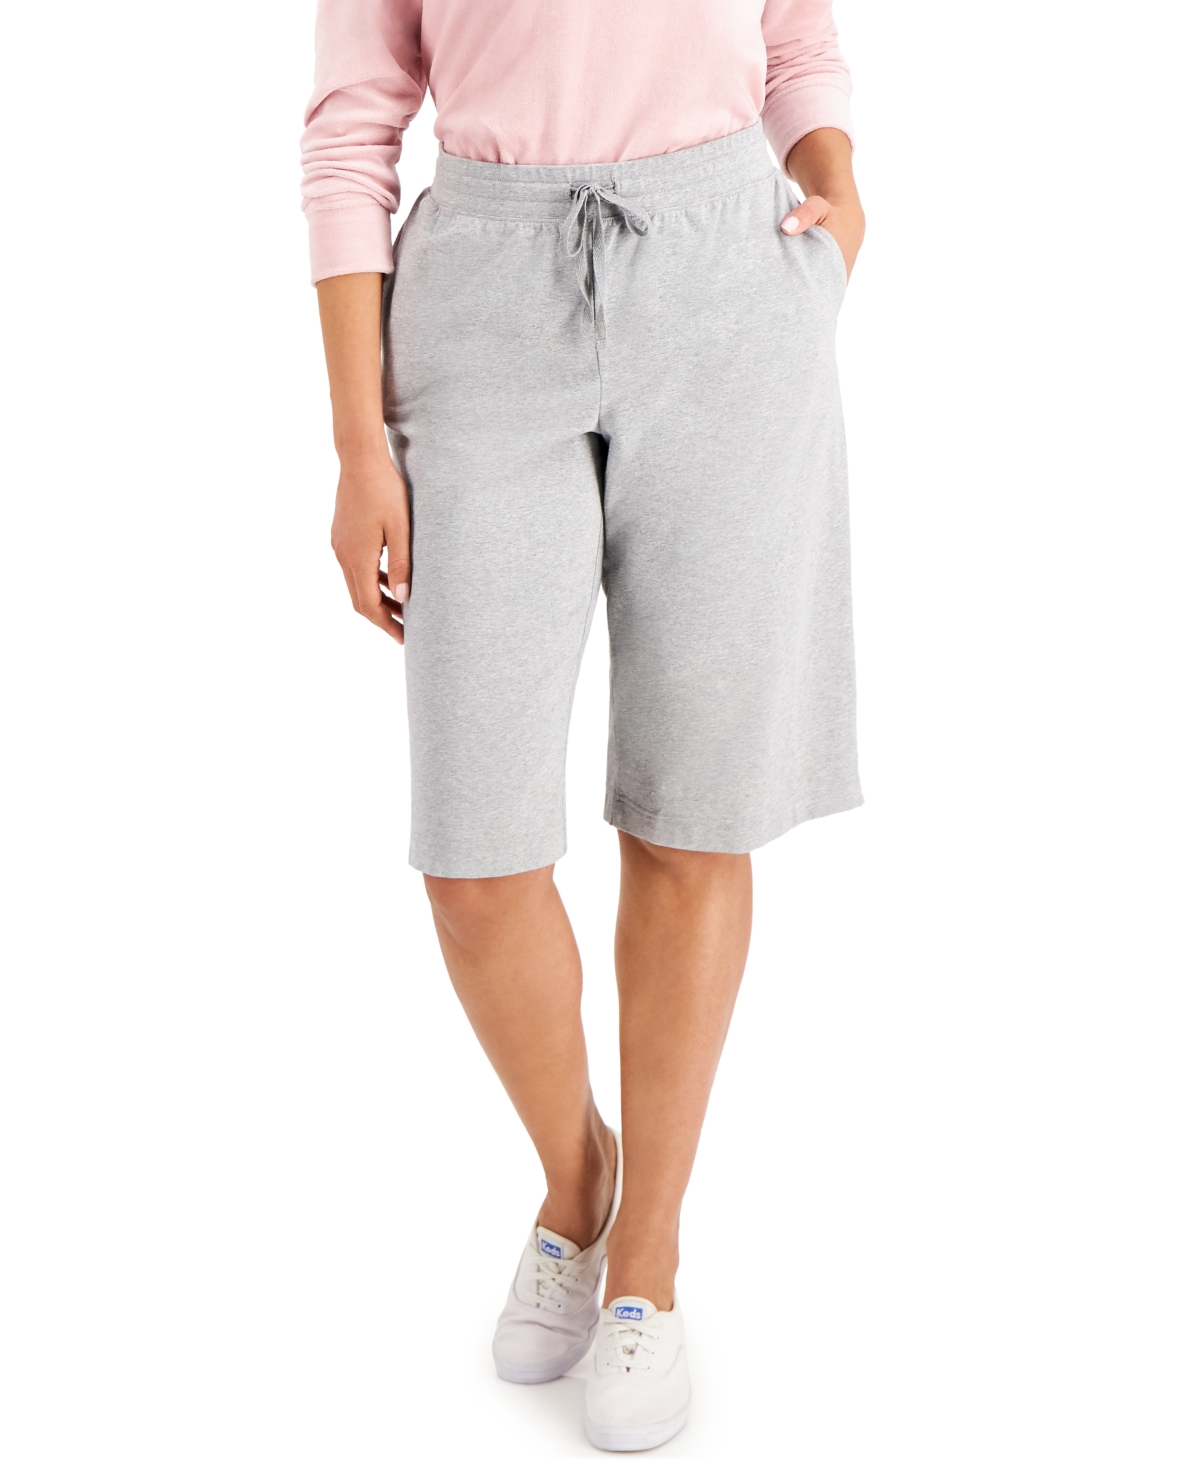 Petite Knit Skimmer Shorts, Created for Macy's - Smoke Grey Heather